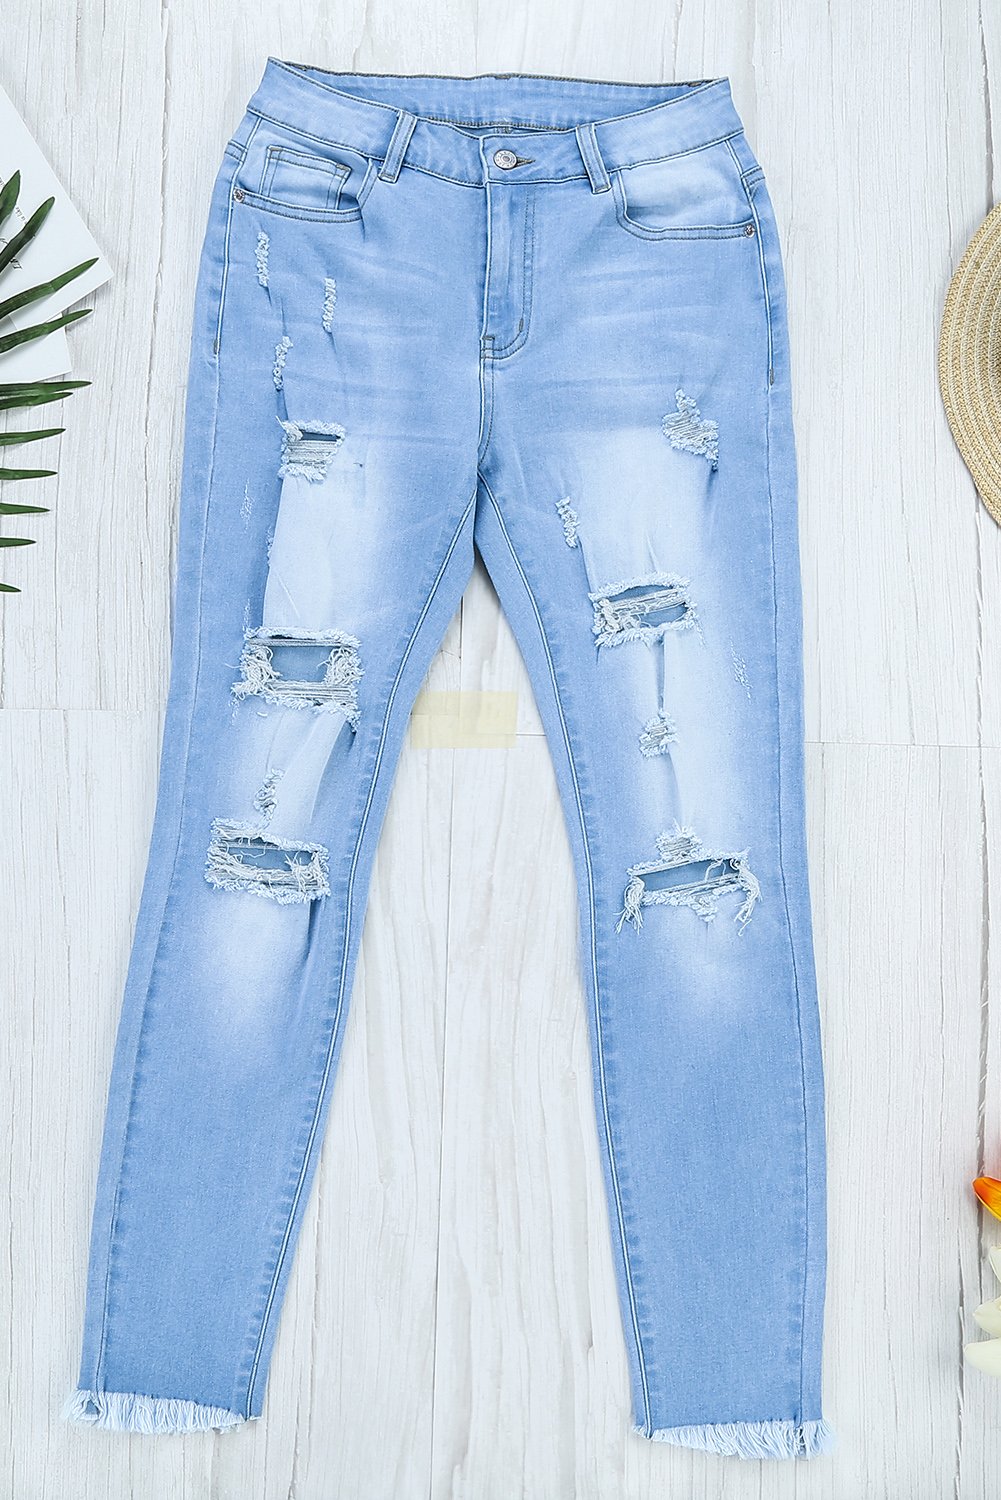 Washed Ripped Jeans Washed Ripped Jeans - M&R CORNERJeans M&R CORNER